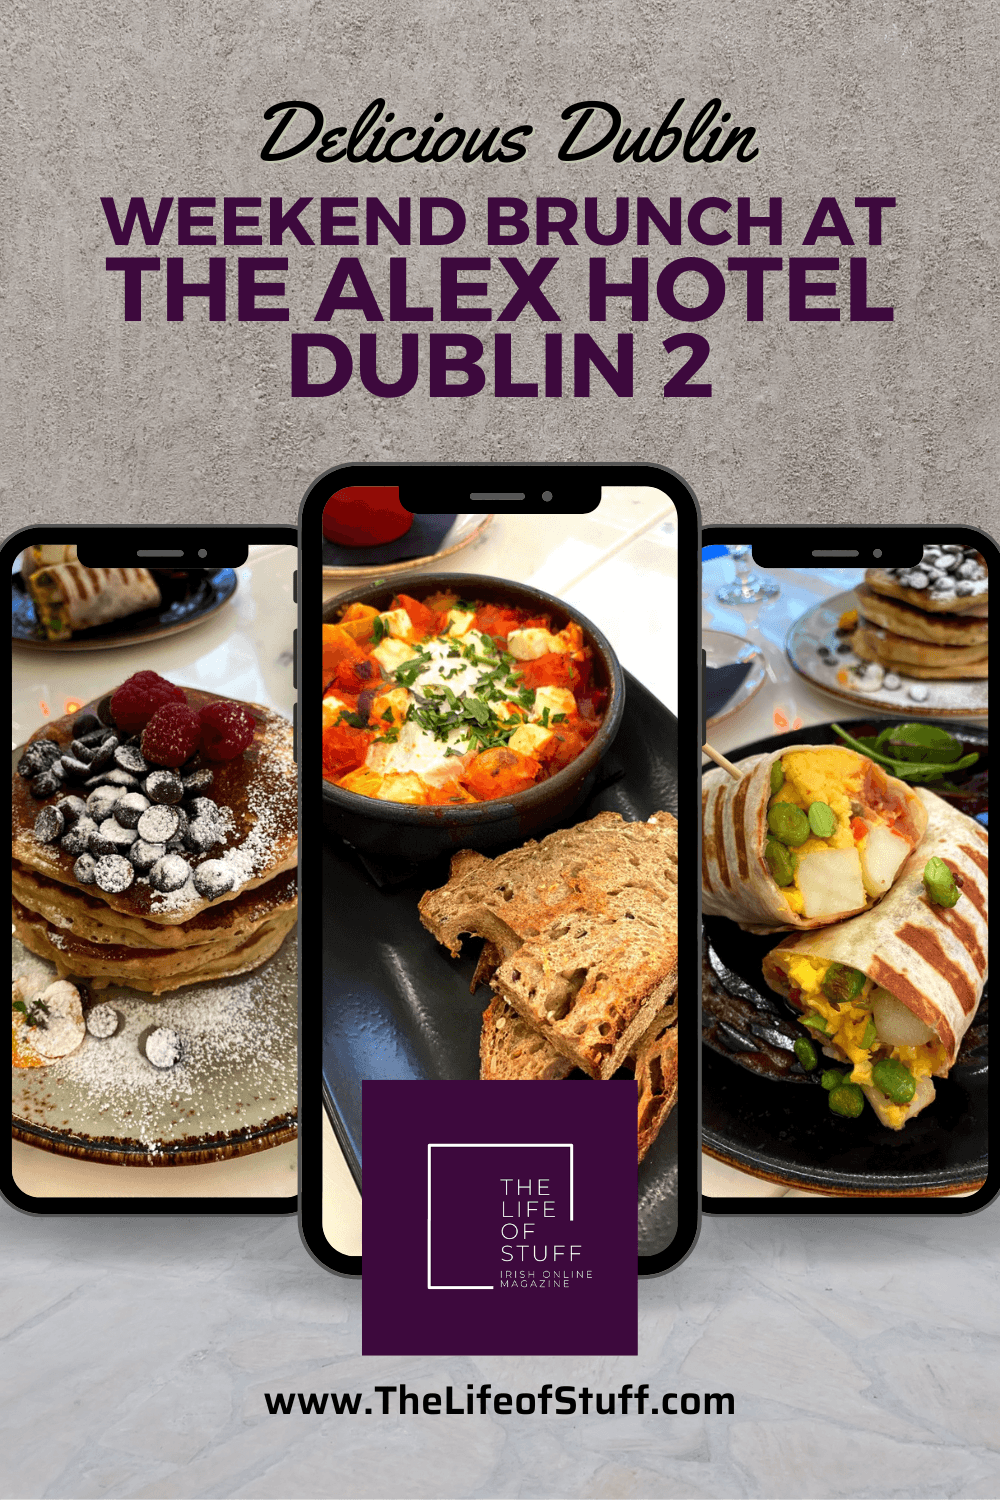 Weekend Brunch at The Alex Hotel Dublin 2 - The Life of Stuff